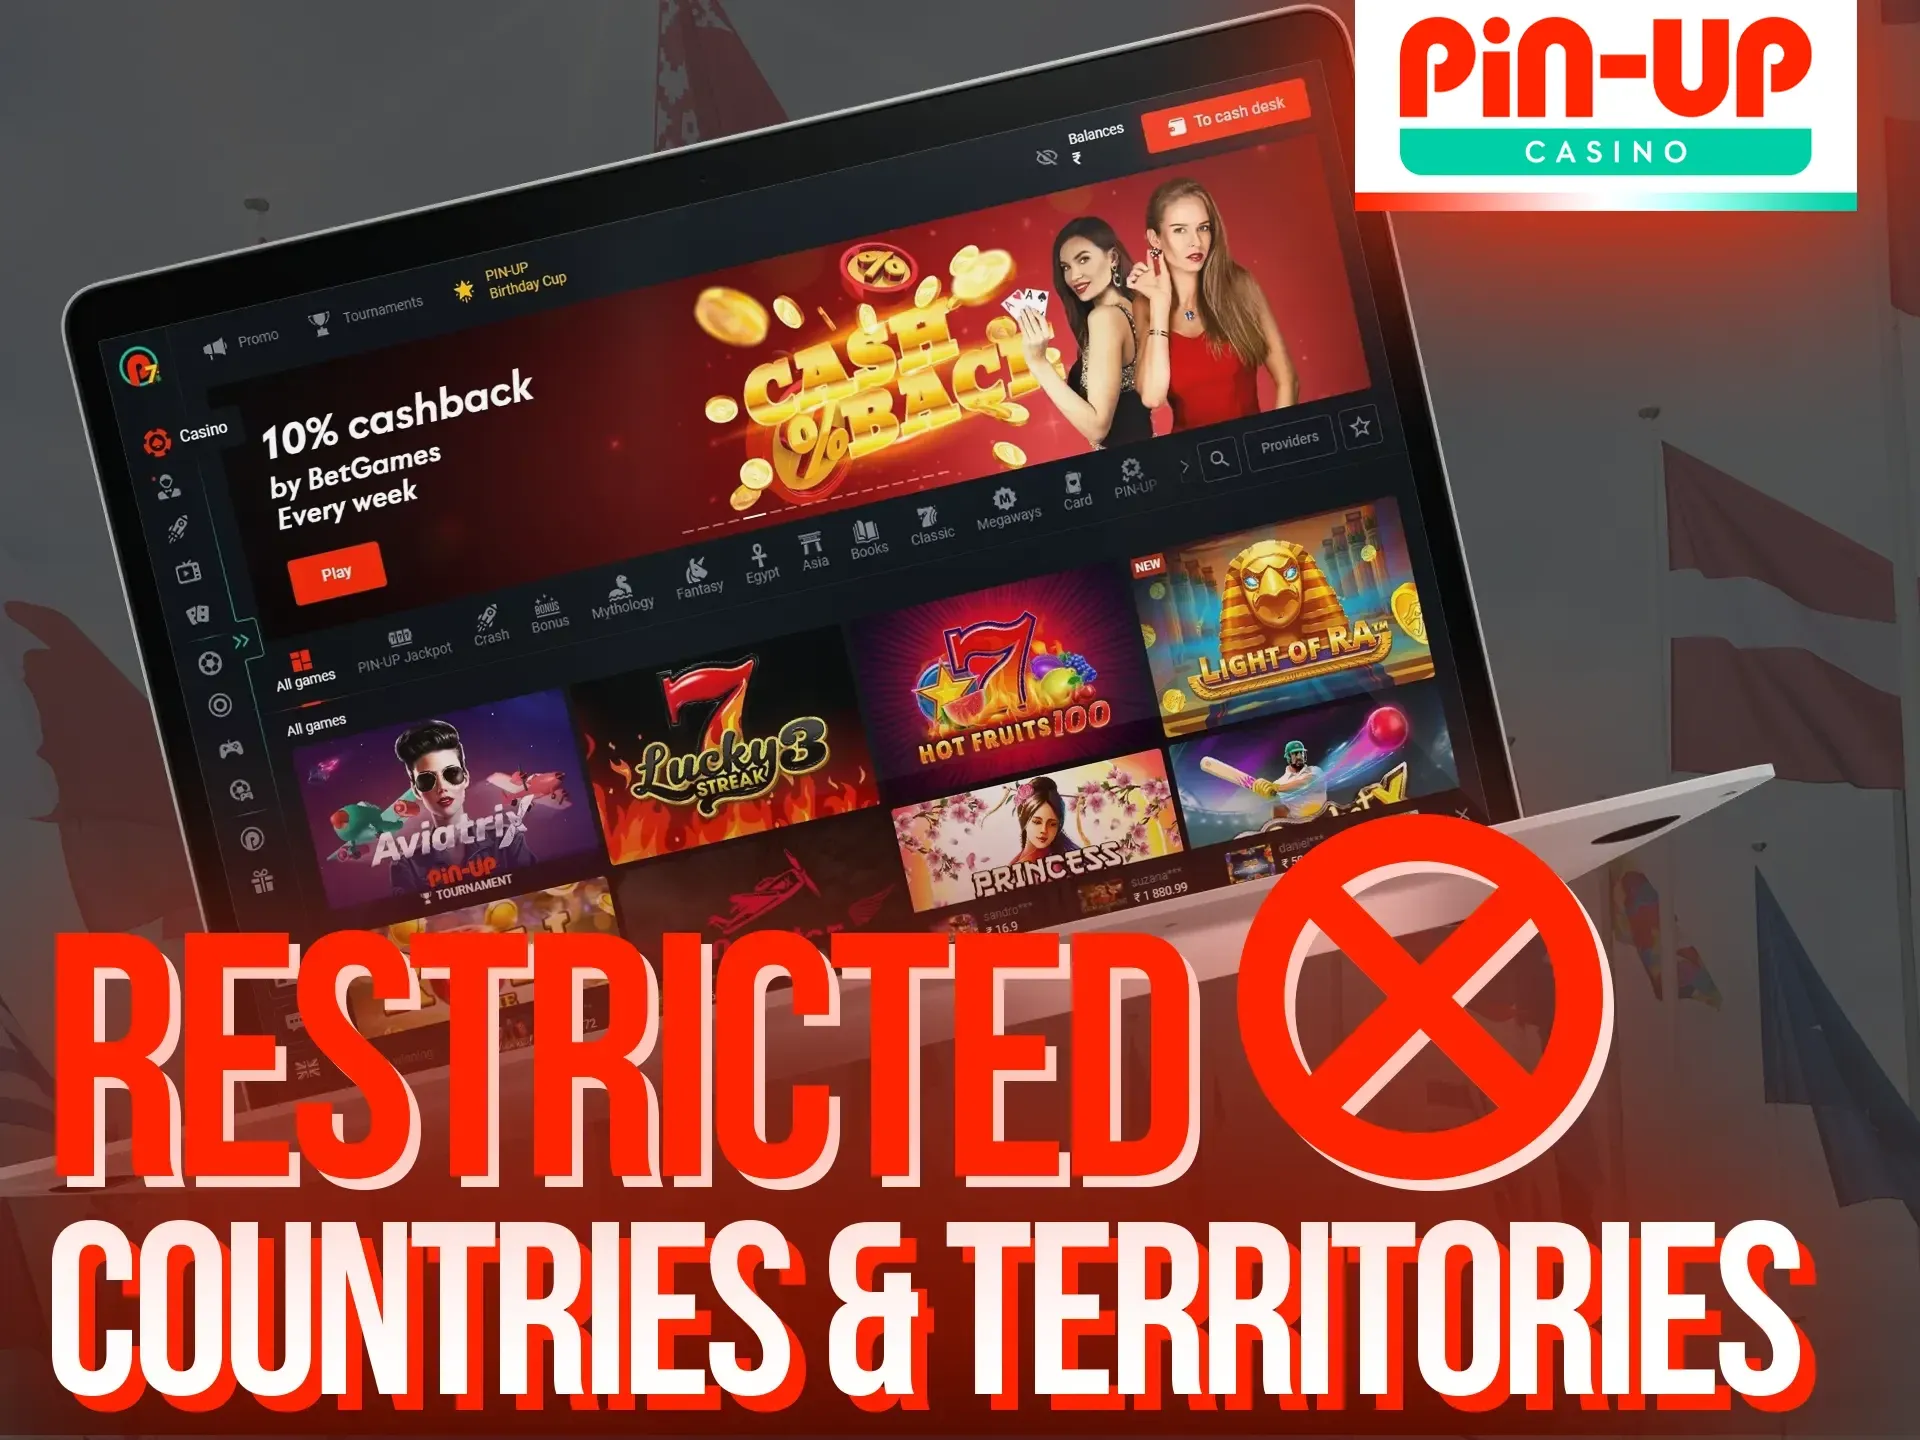 There are several countries where Pin-Up online casino is banned.